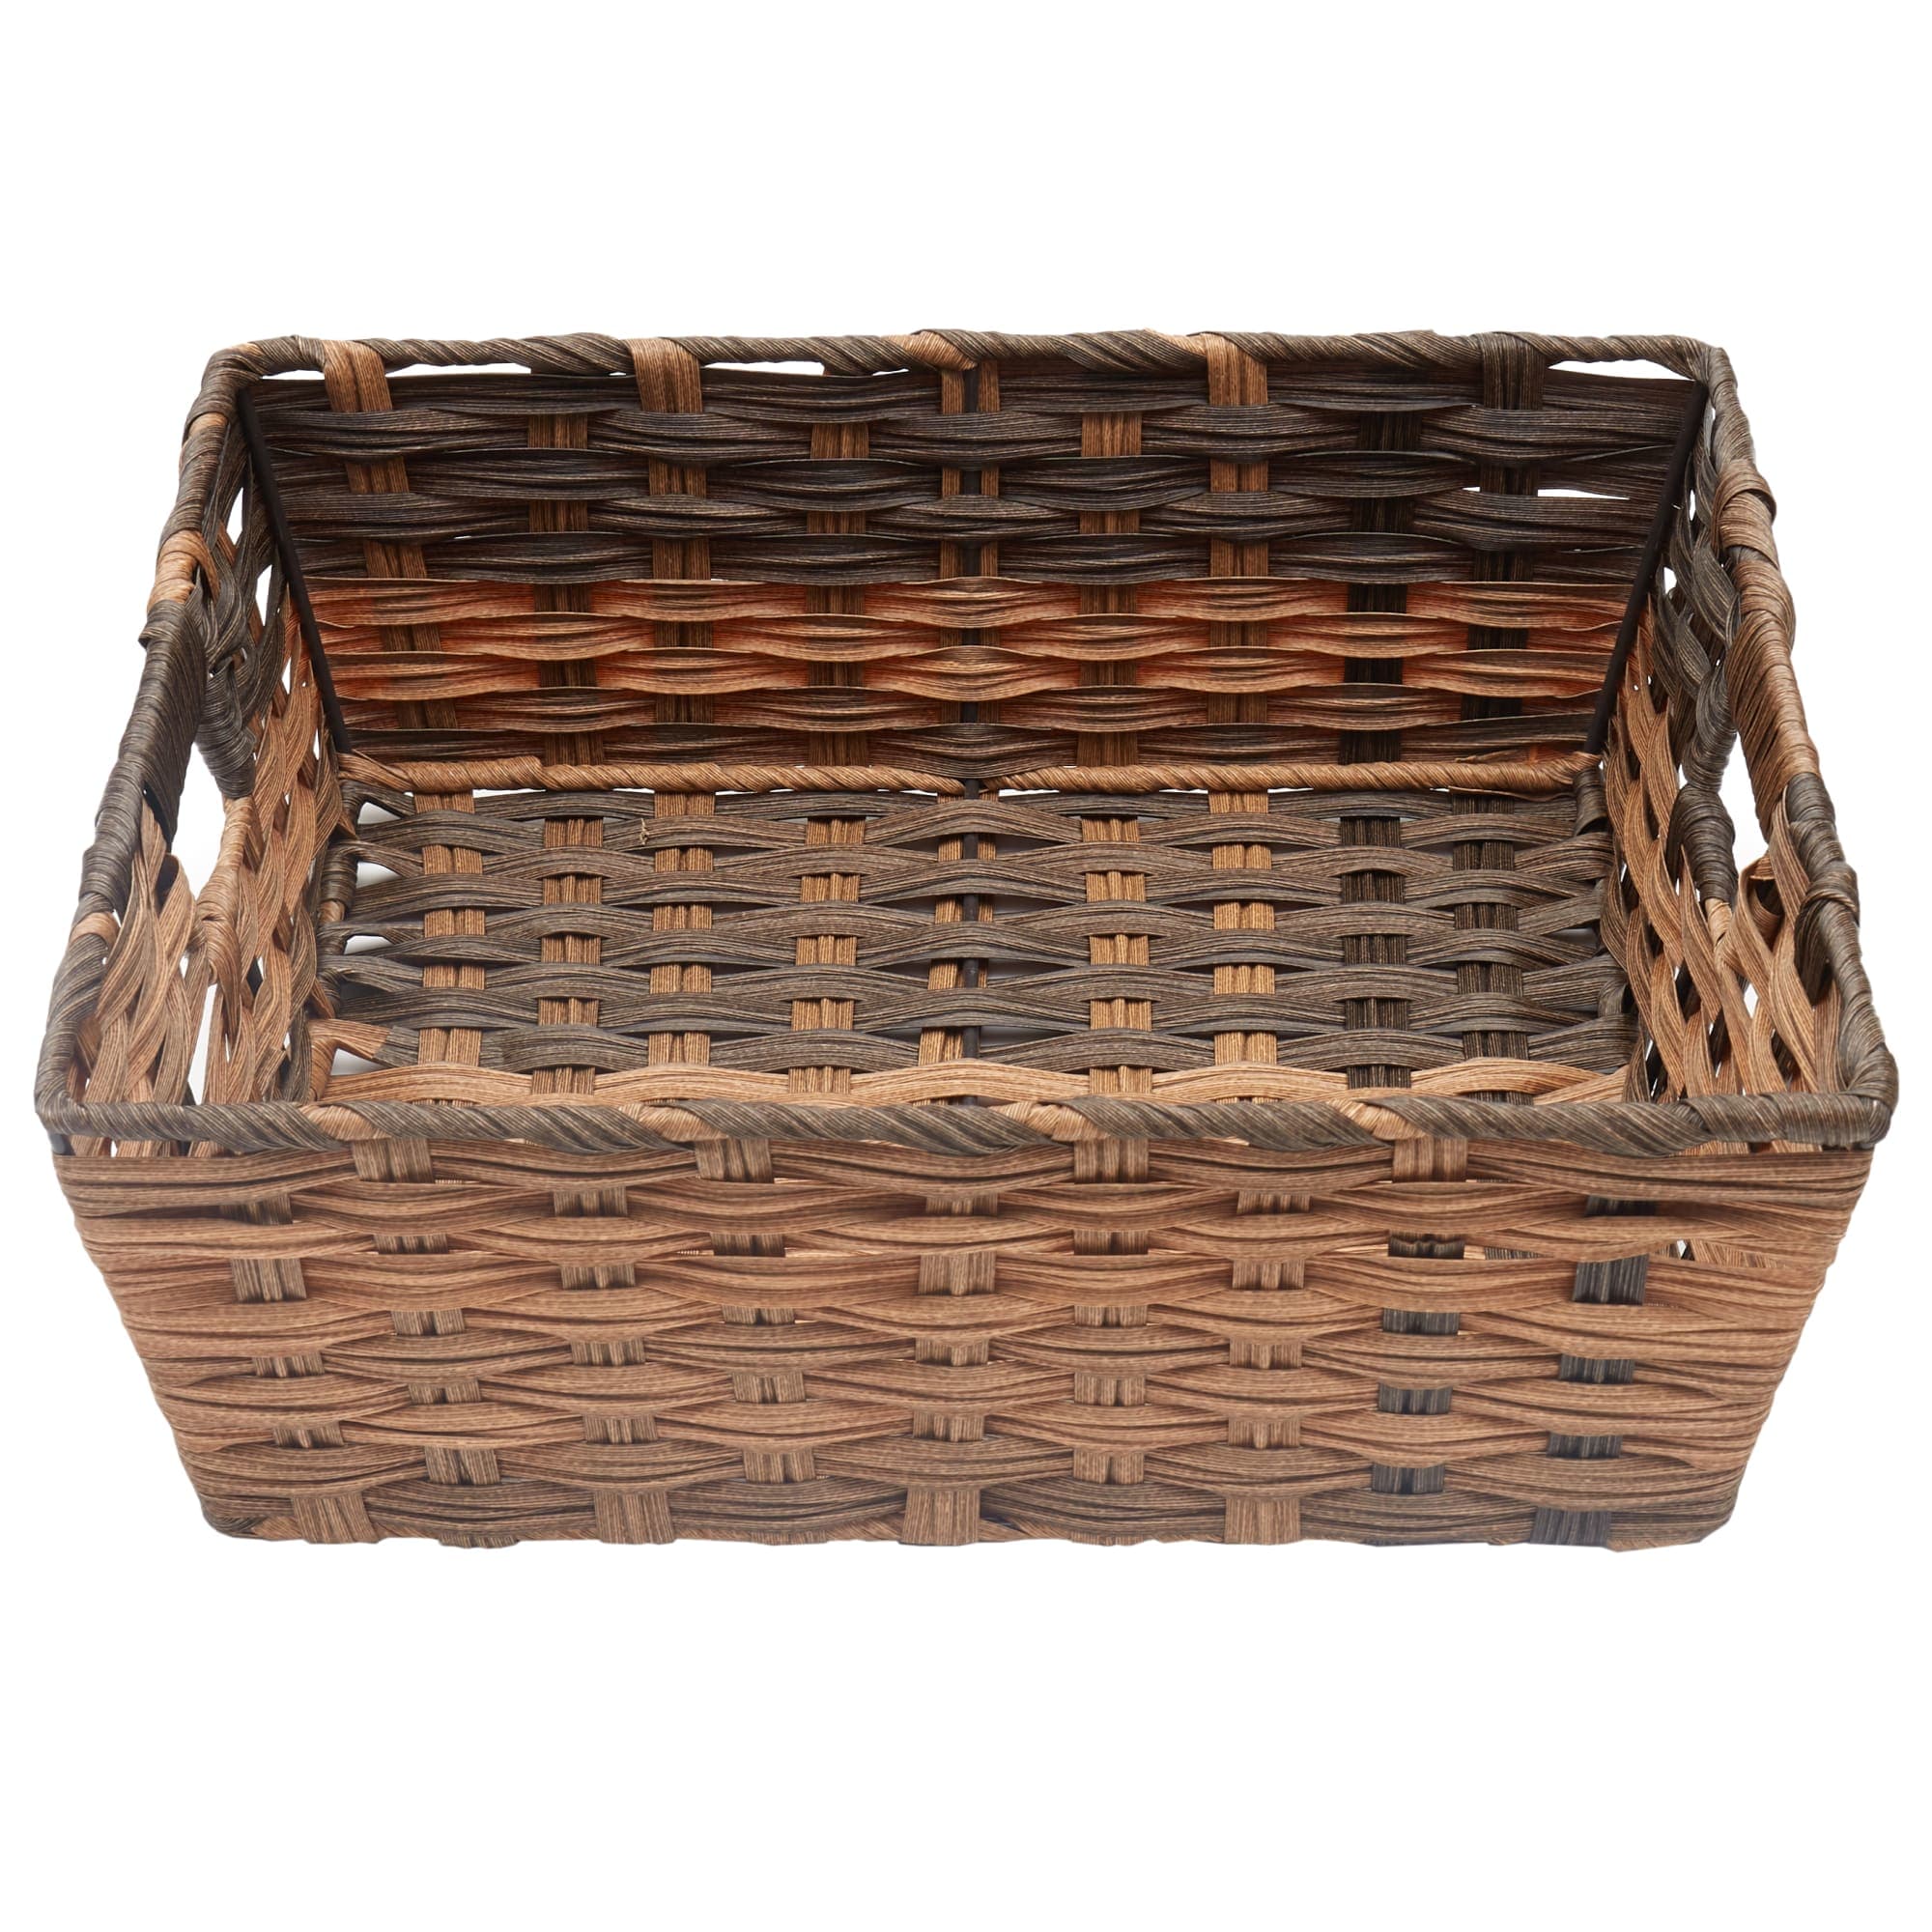 Home Basics Large Faux Rattan Basket with Cut-out Handles, Coffee $10.00 EACH, CASE PACK OF 6